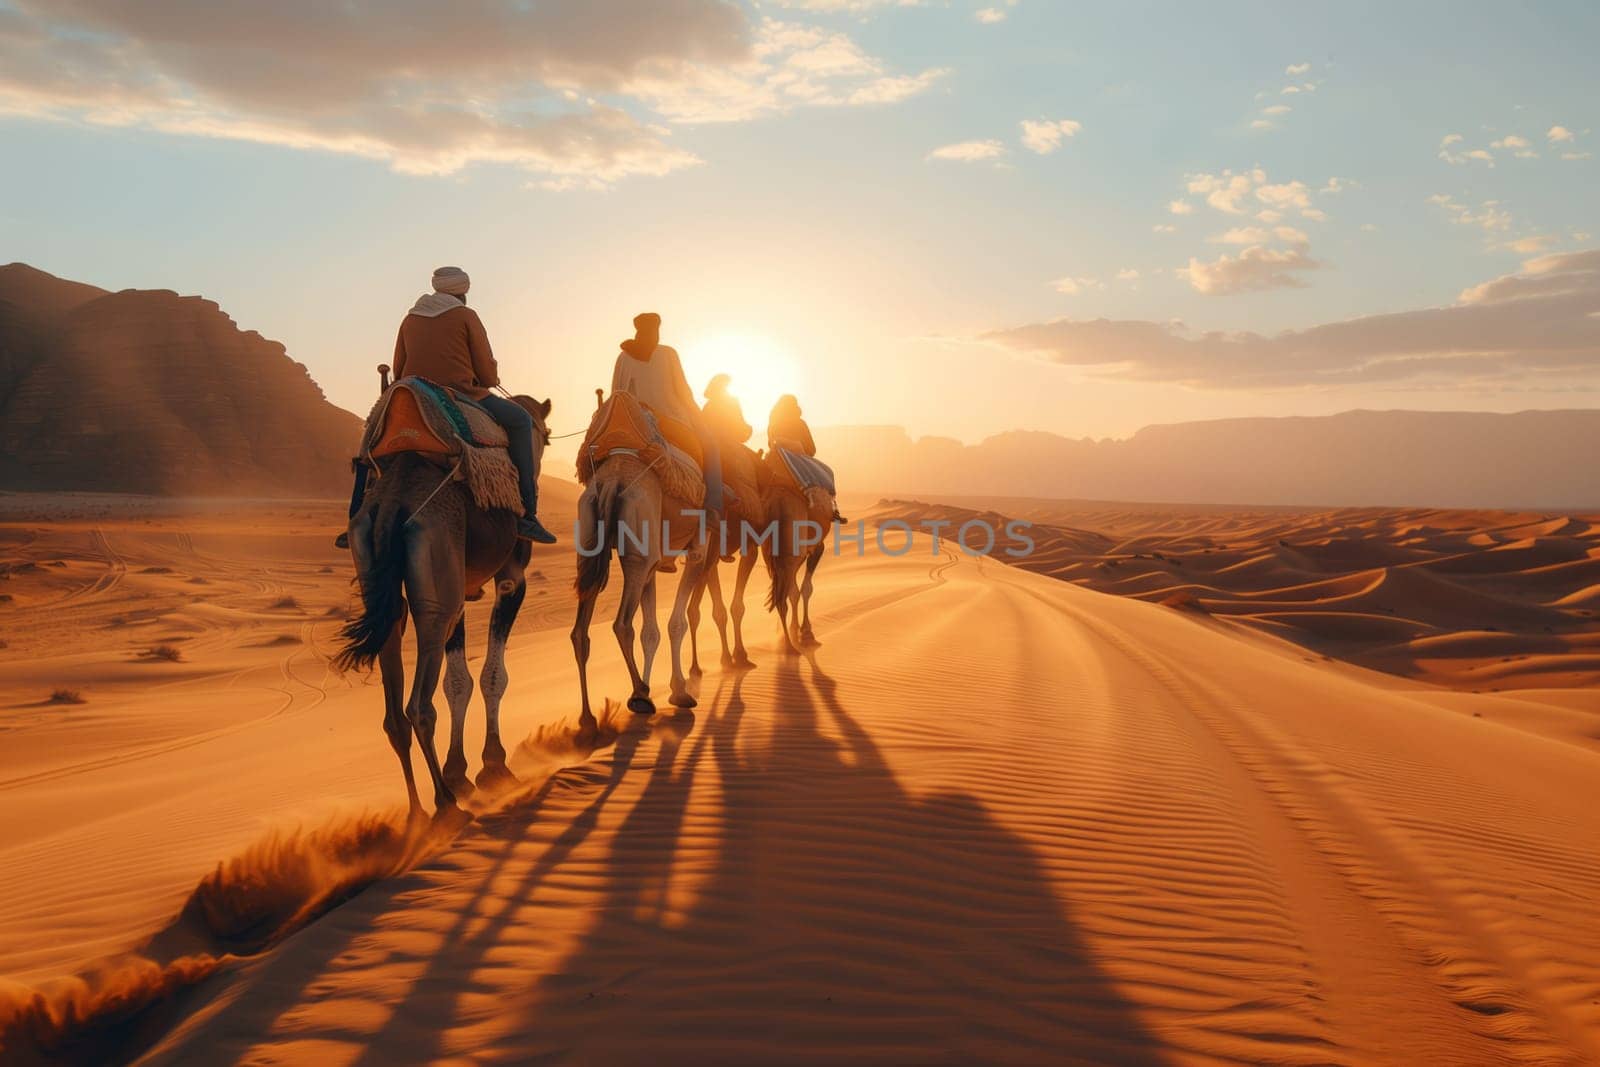 A group of travelers are riding pack camels through the desert landscape as the sun sets behind the aeolian landforms, creating a beautiful dusk sky